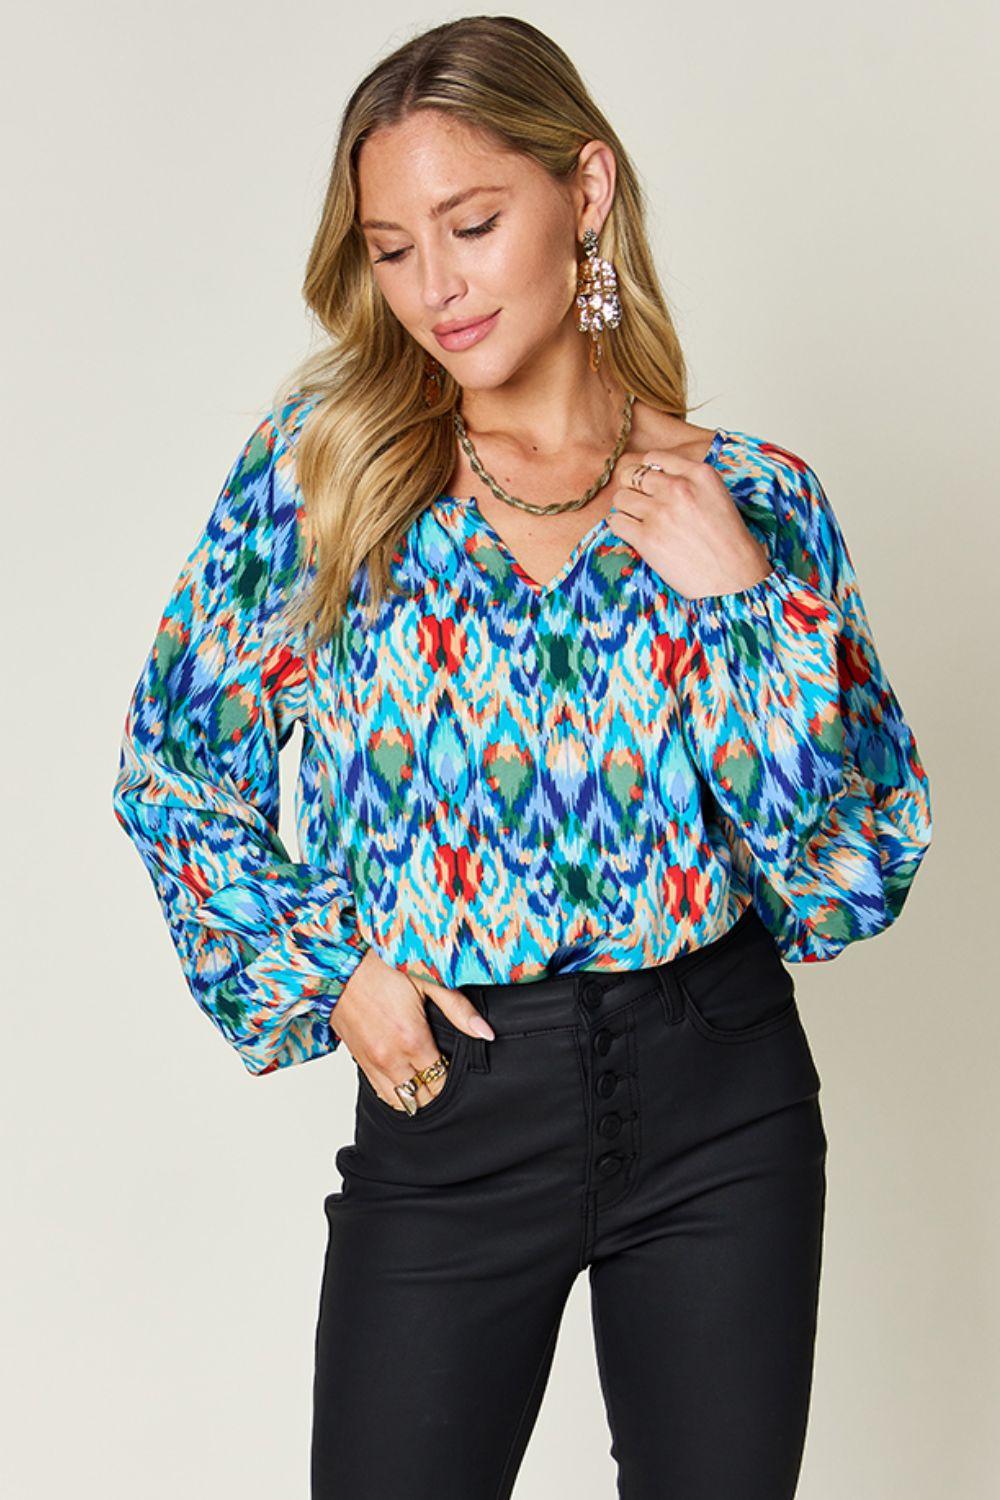 Double Take Full Size Printed Balloon Sleeve Blouse Sky Blue Shirts & Tops